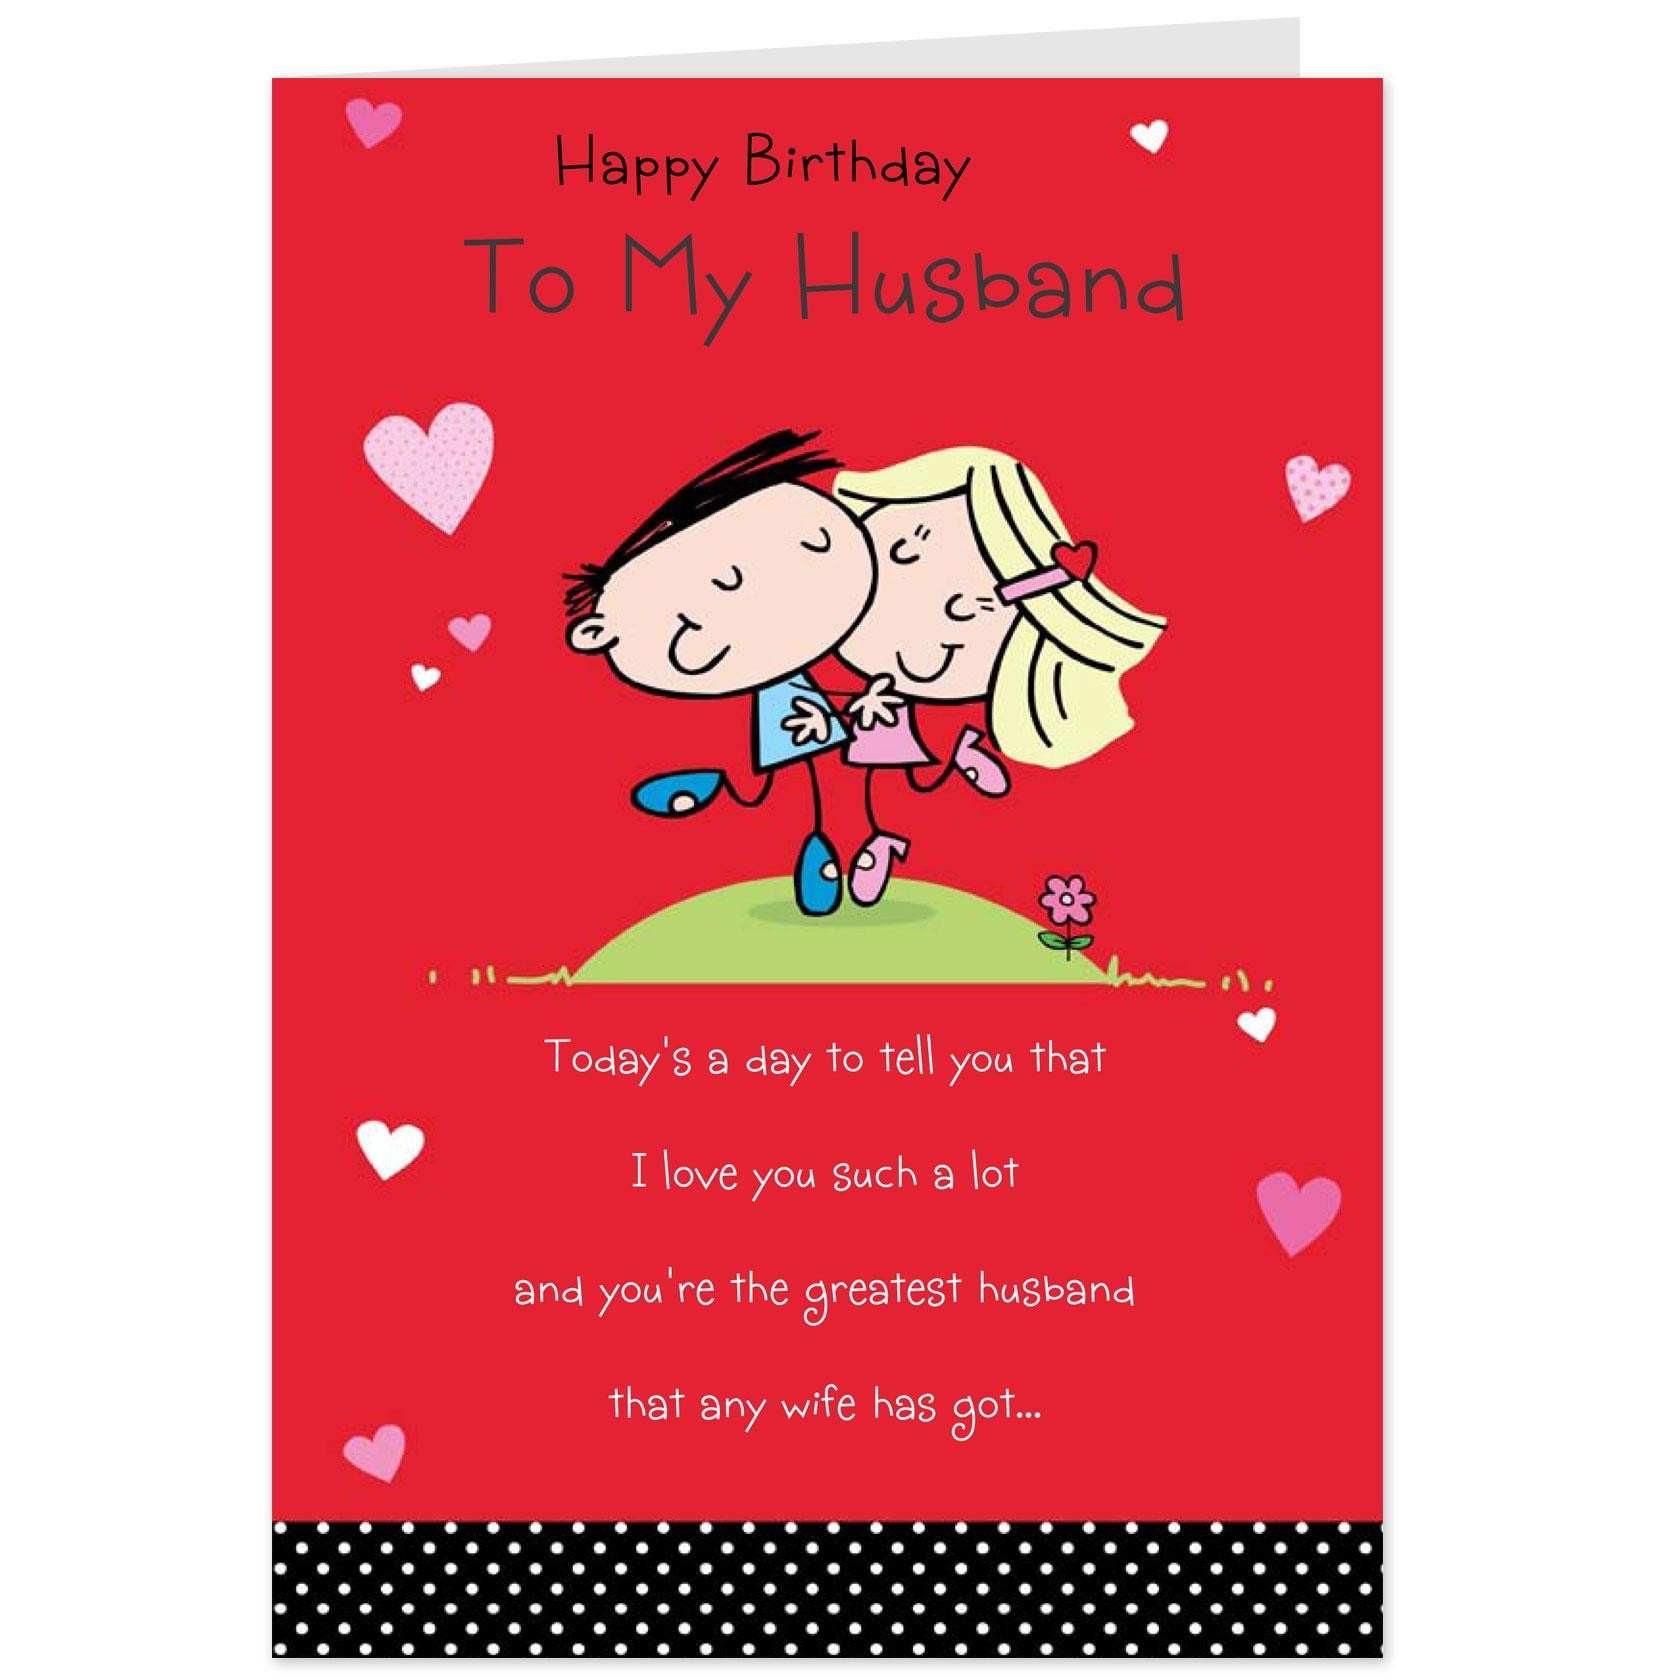 Happy Birthday Husband Quotes Funny
 The Best and Most prehensive Happy Birthday